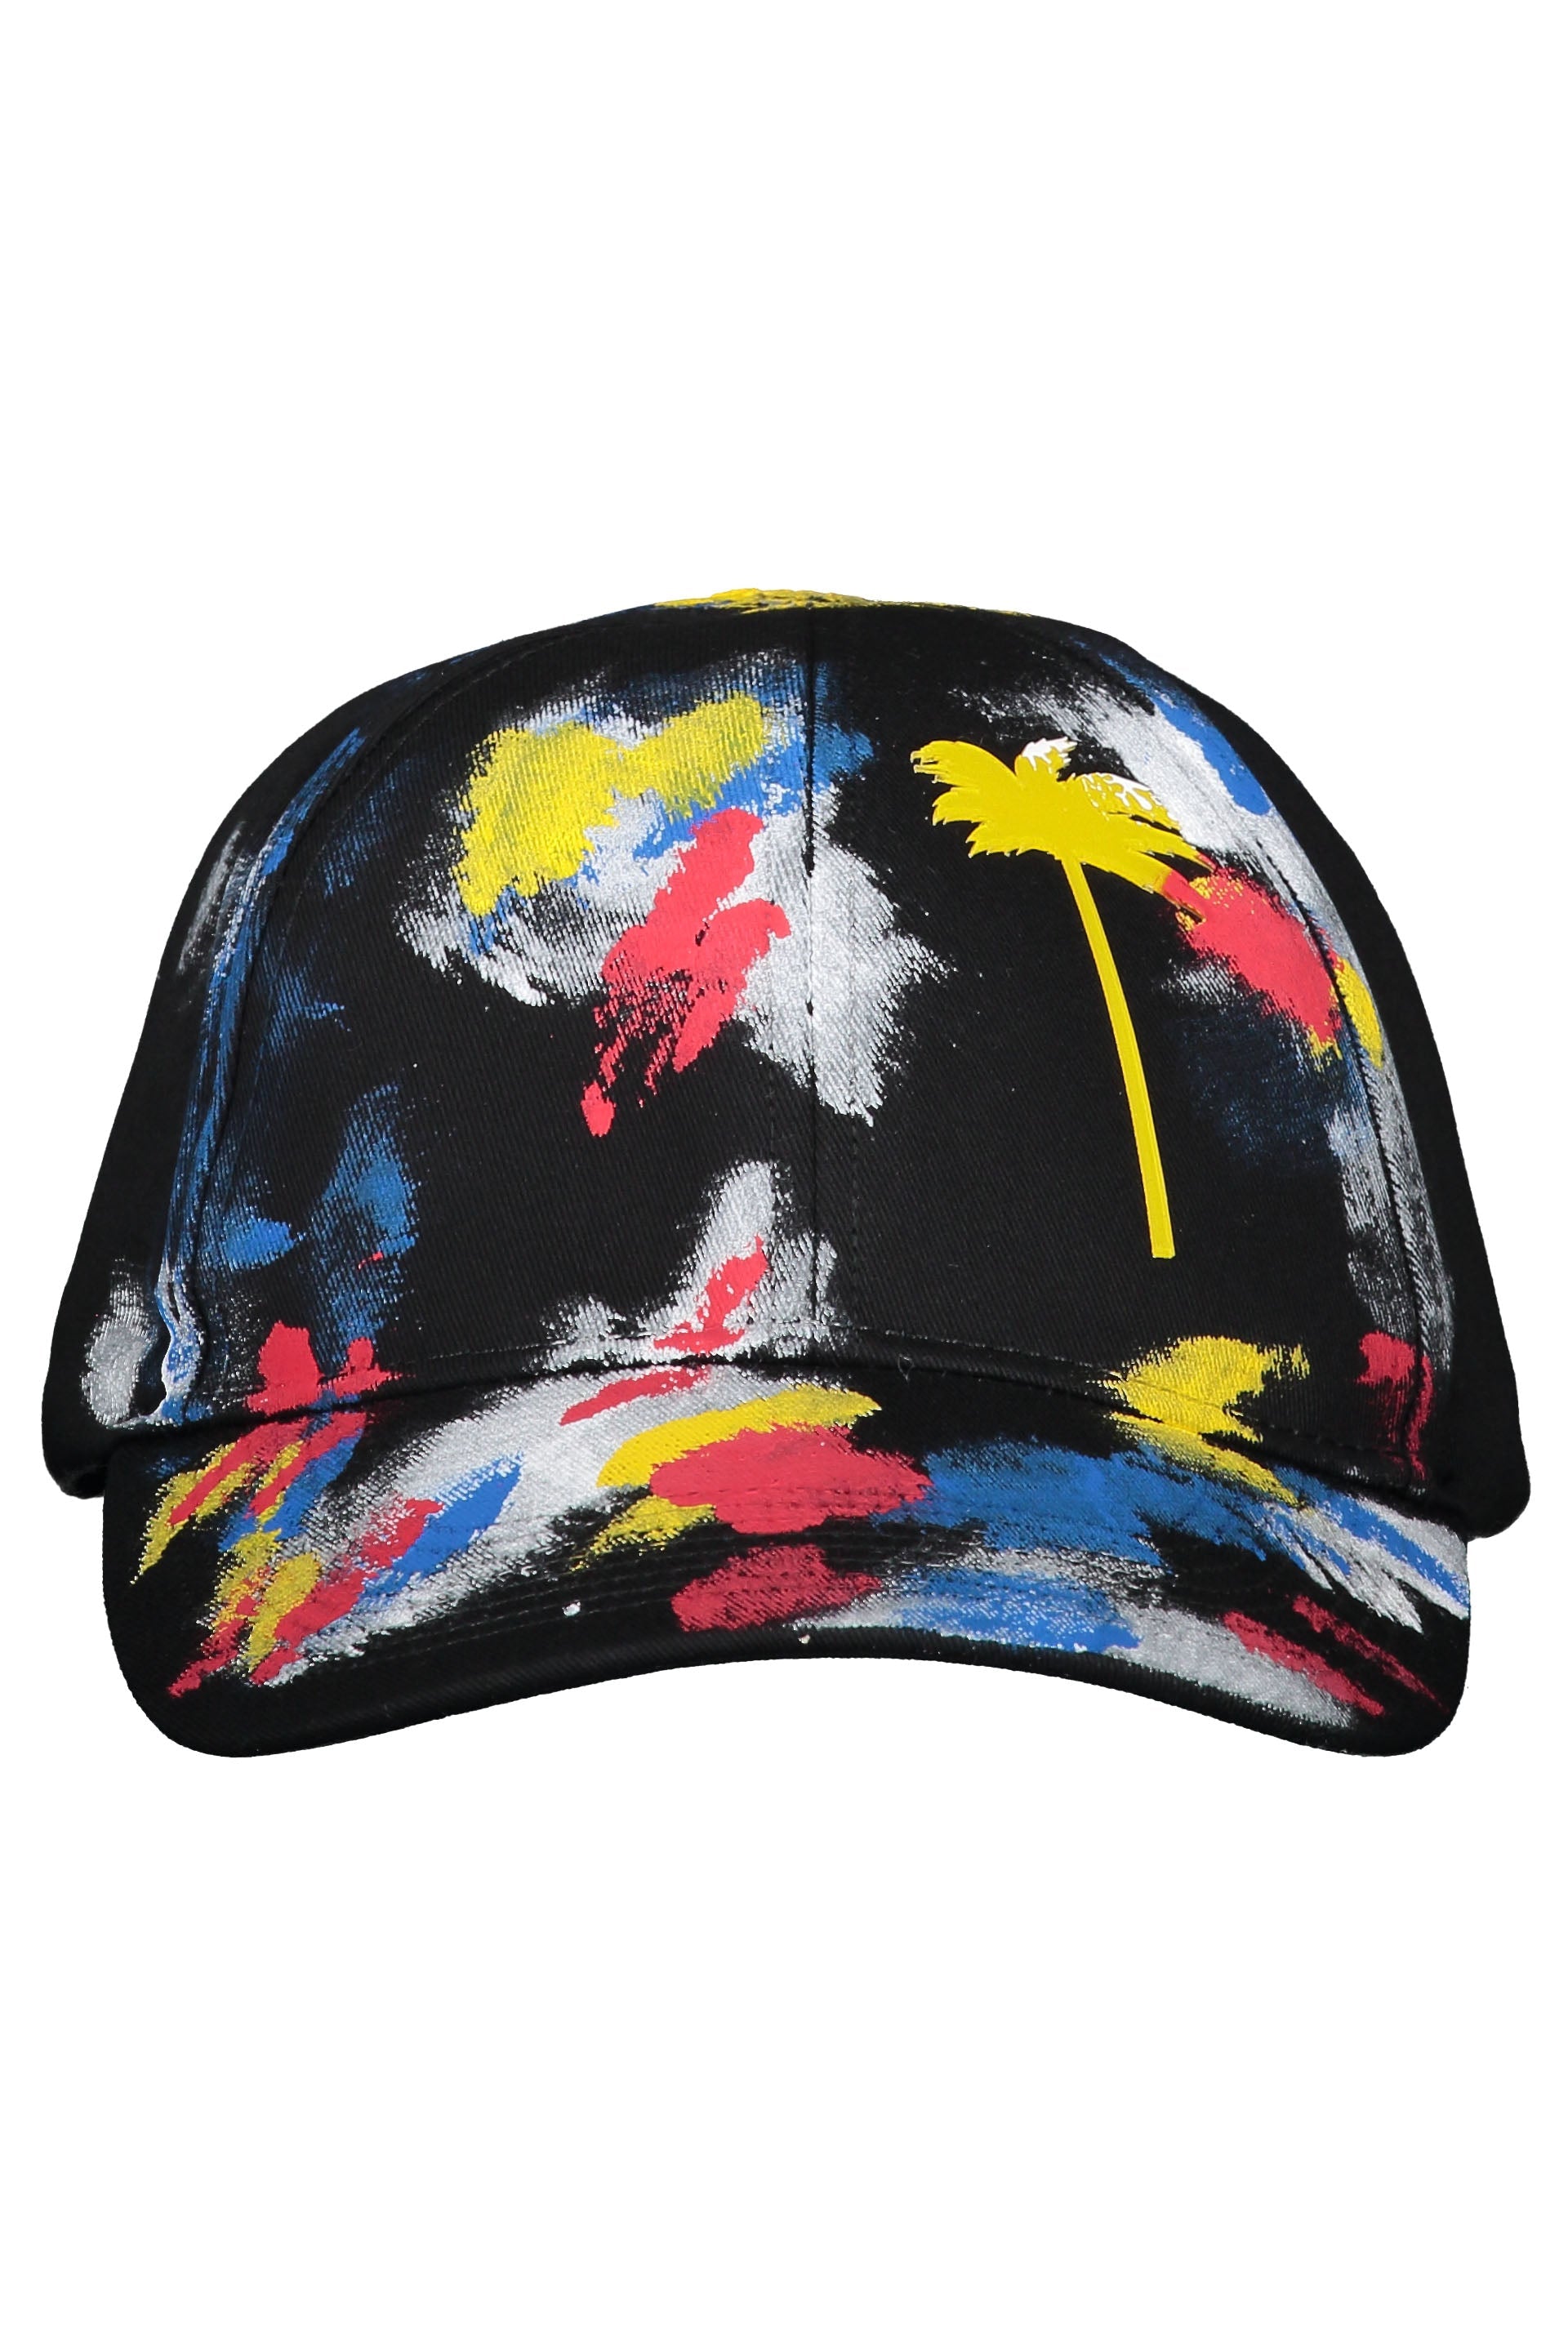 Palm-Angels-OUTLET-SALE-Baseball-cap-Hute-TU-ARCHIVE-COLLECTION.jpg